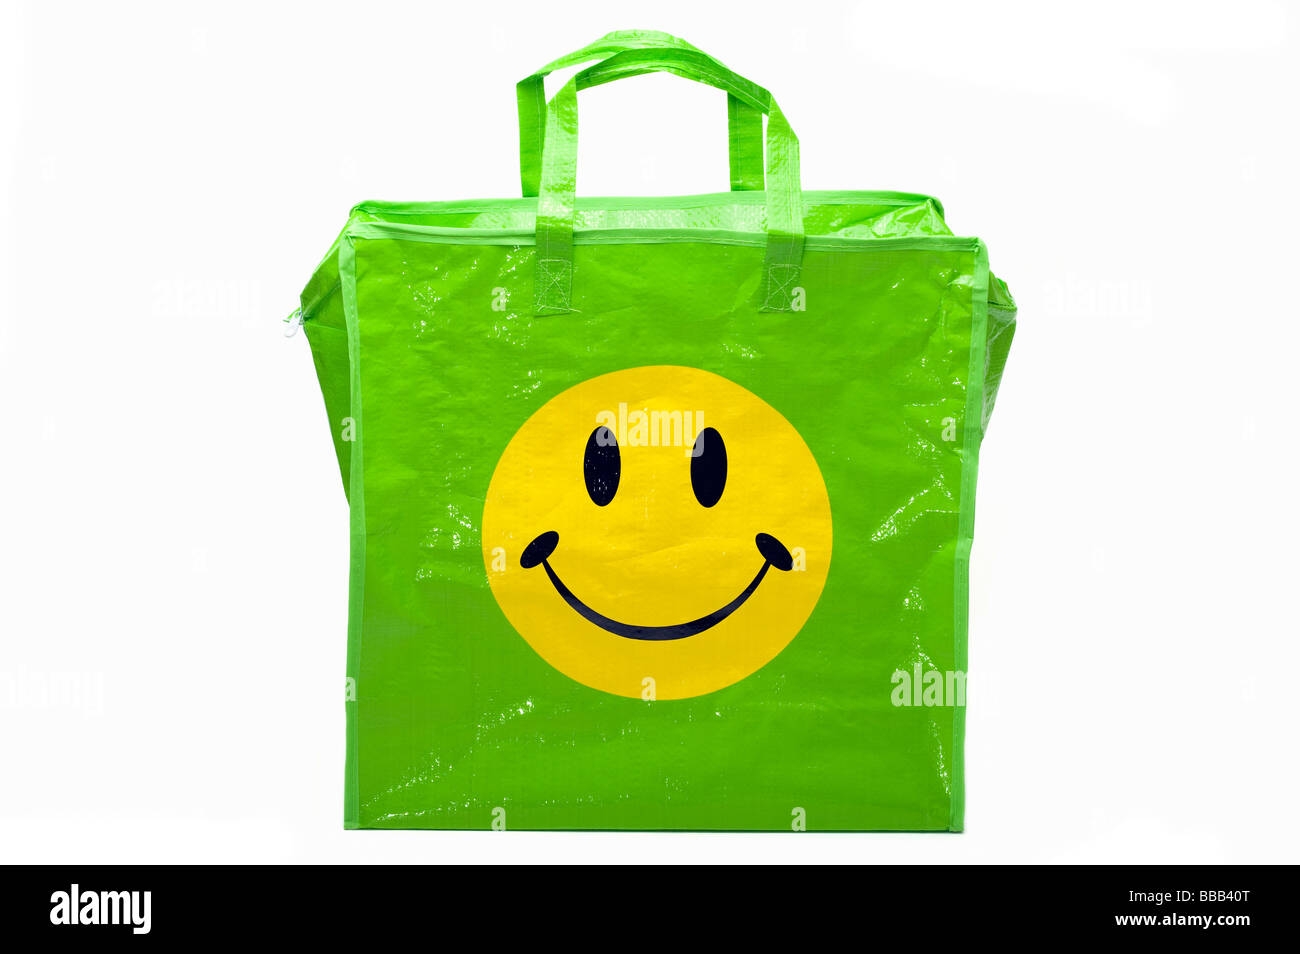 Green And Yellow Smiley Face On A Plastic Carrier Bag Stock Photo Alamy